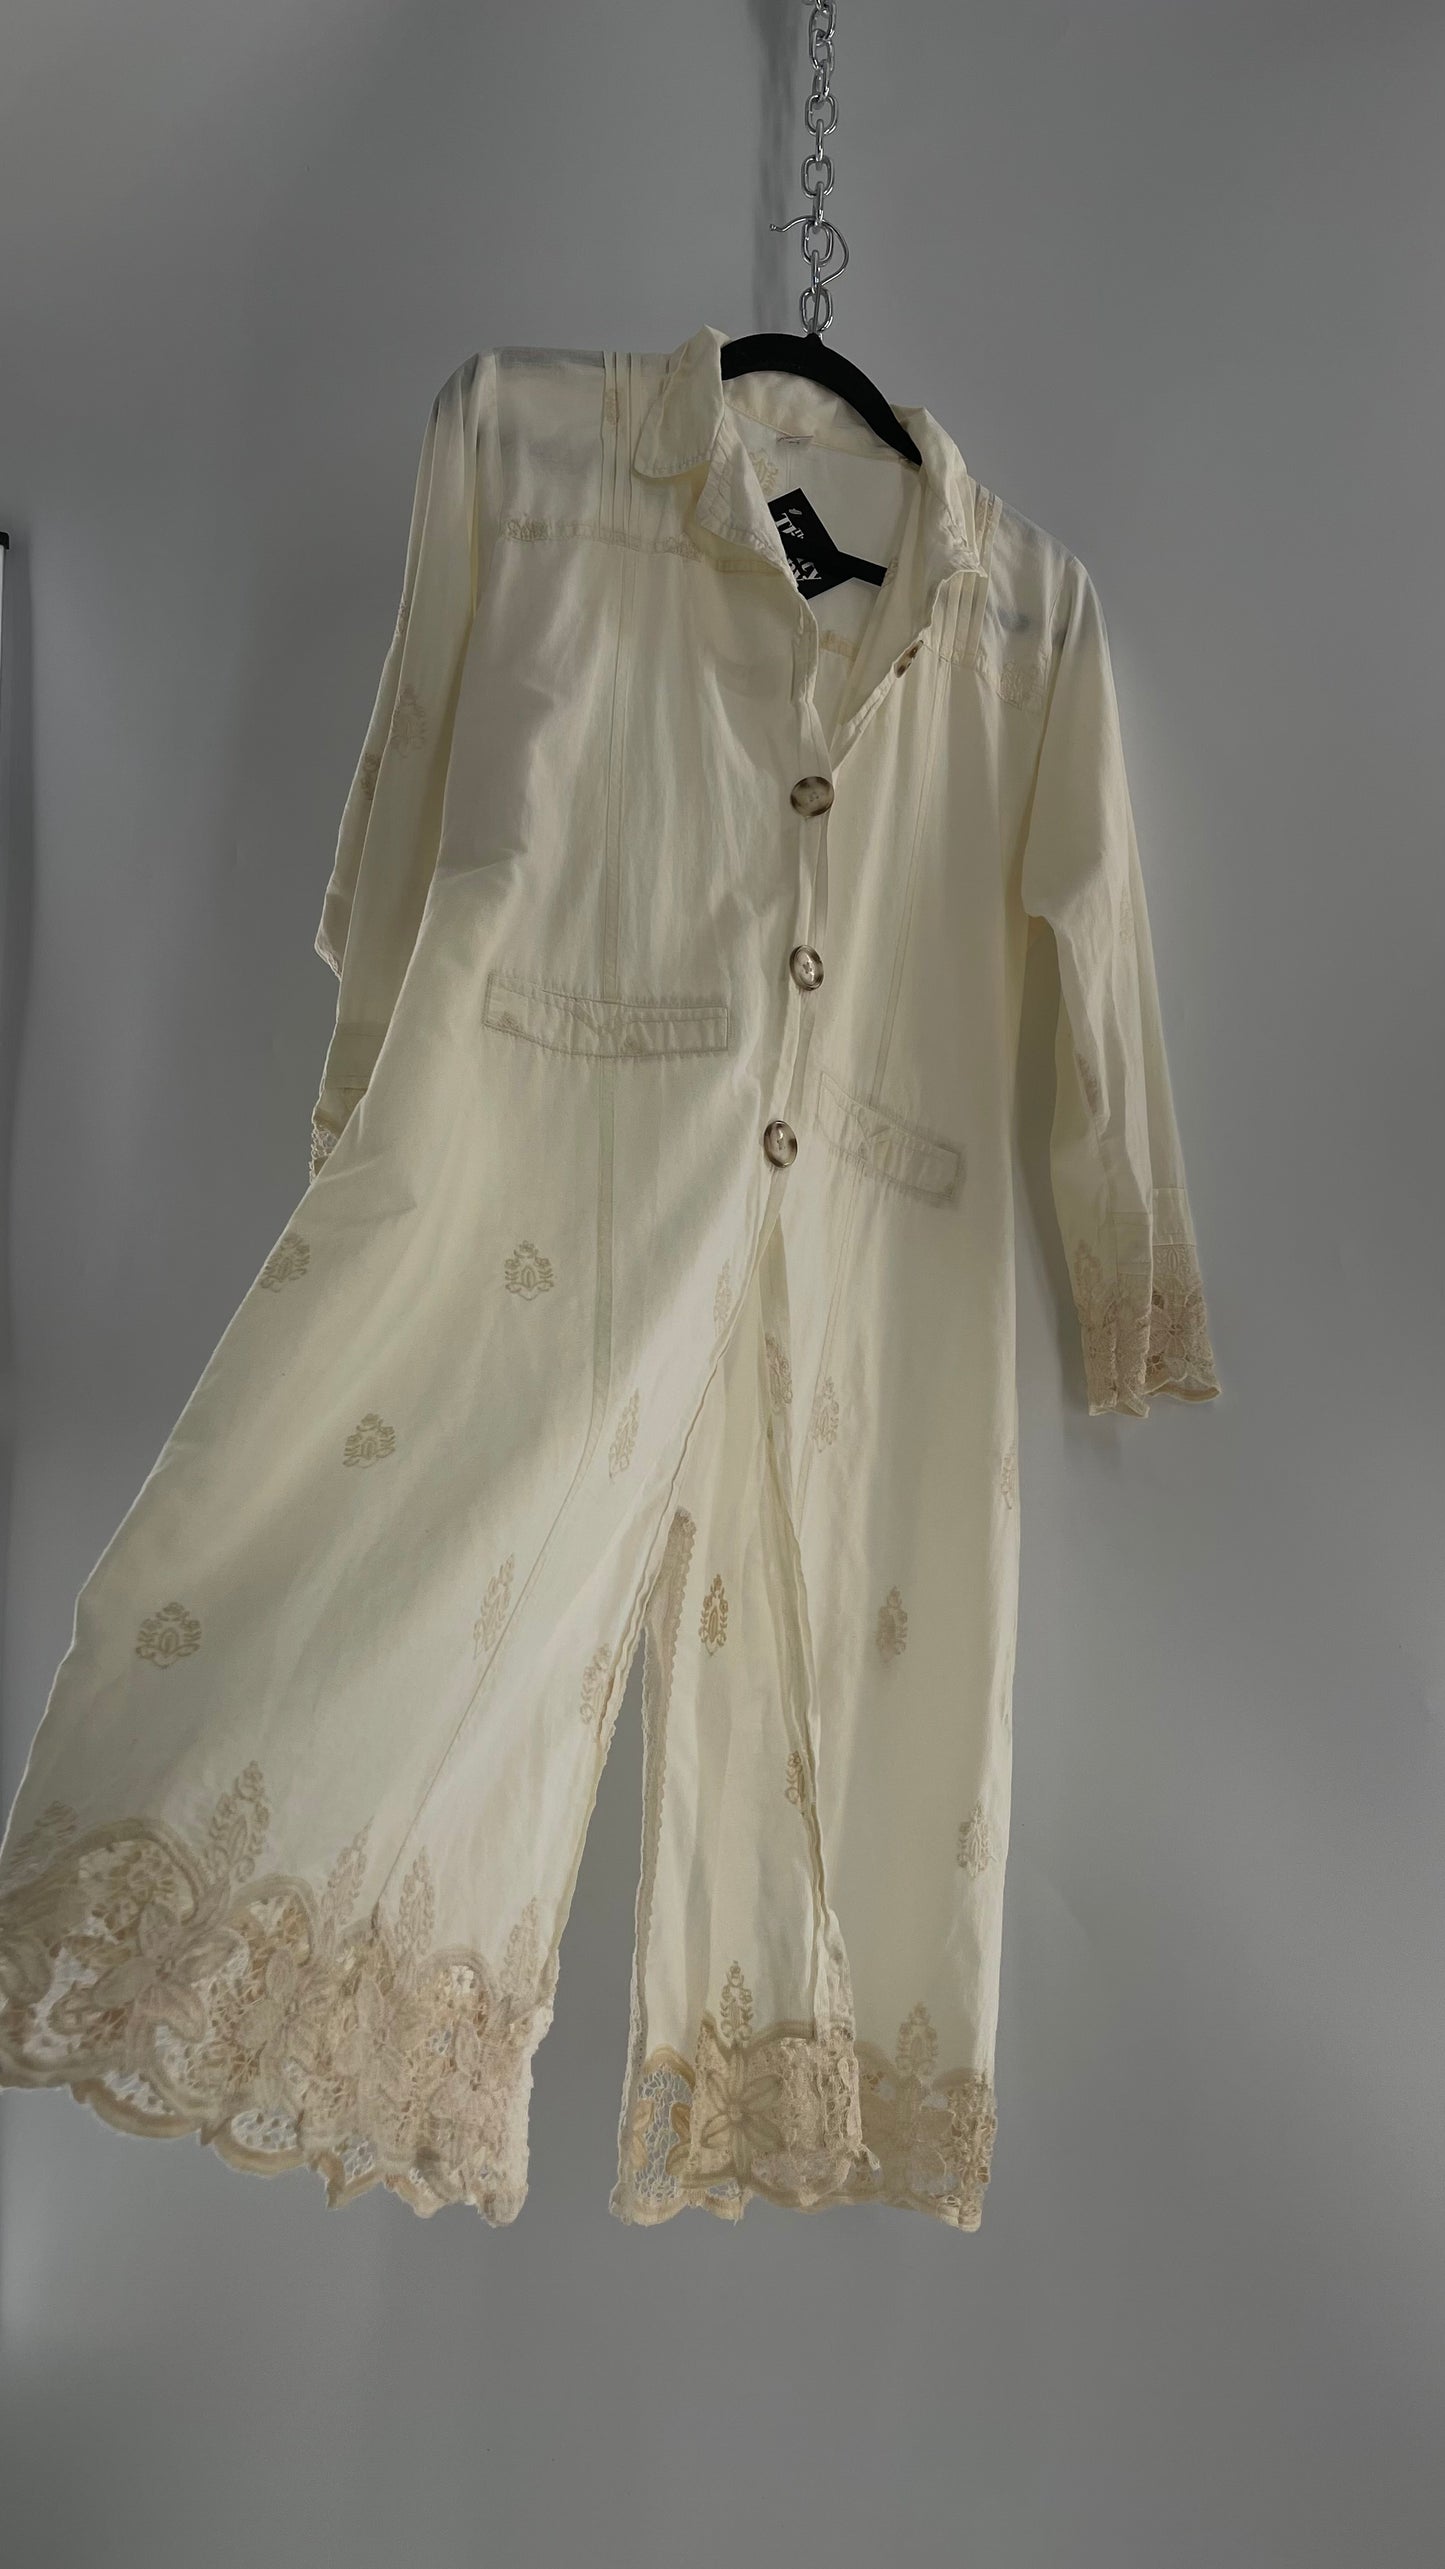 Vintage Embroidered Cotton Coat with Lace Cuffs (S/M)